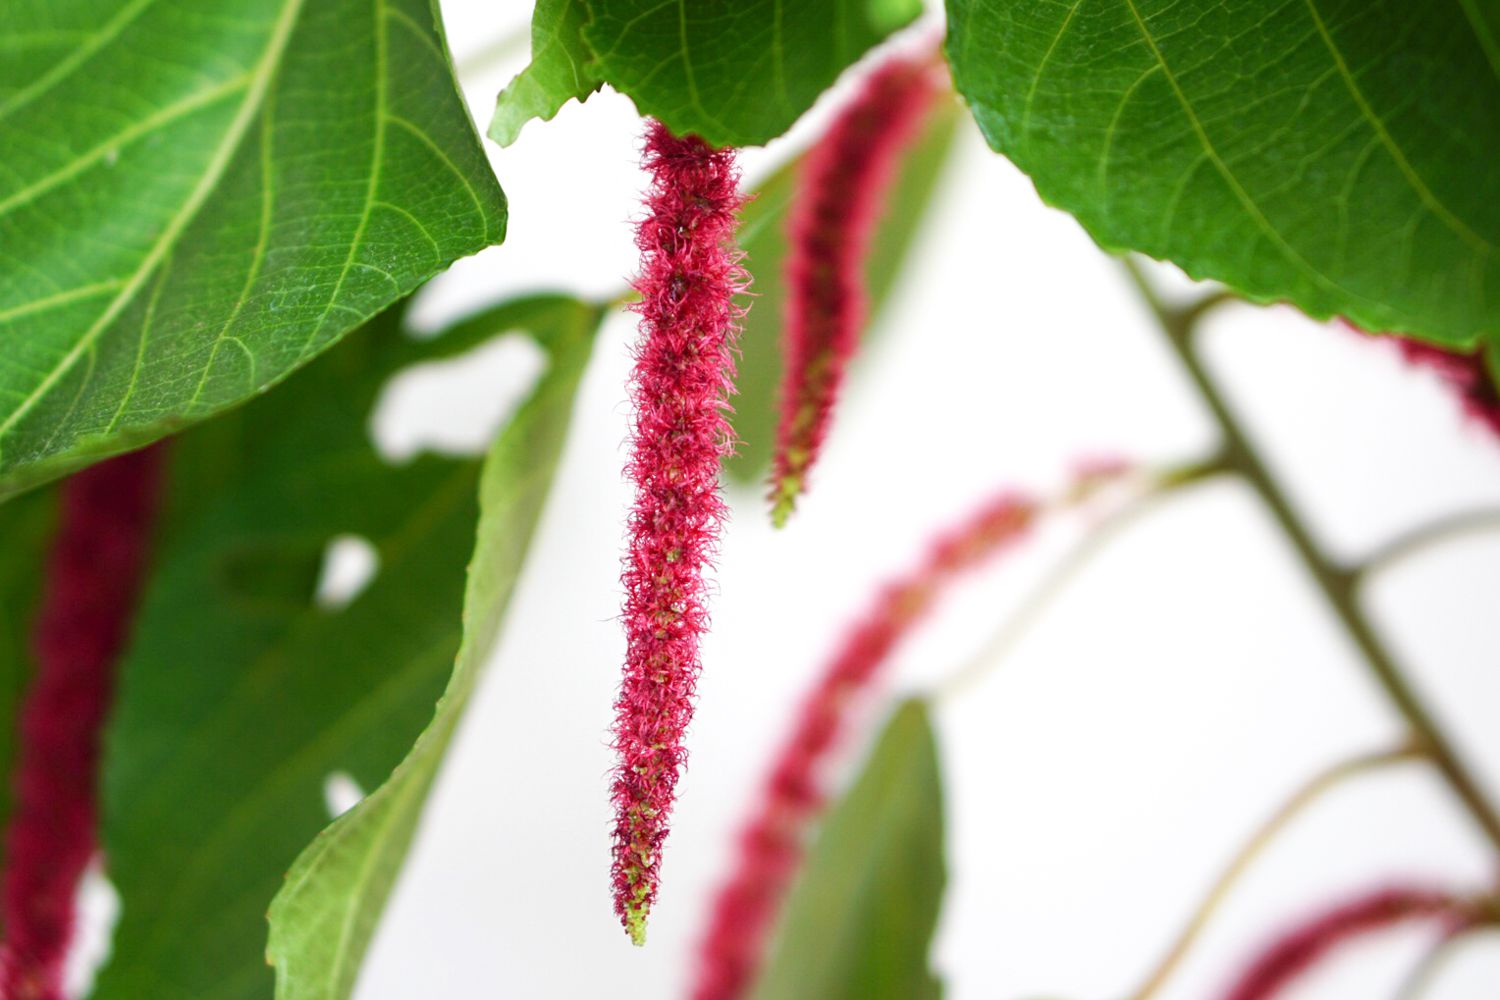 Acalypha plant with red bottle brush-like flowers hanging closeup